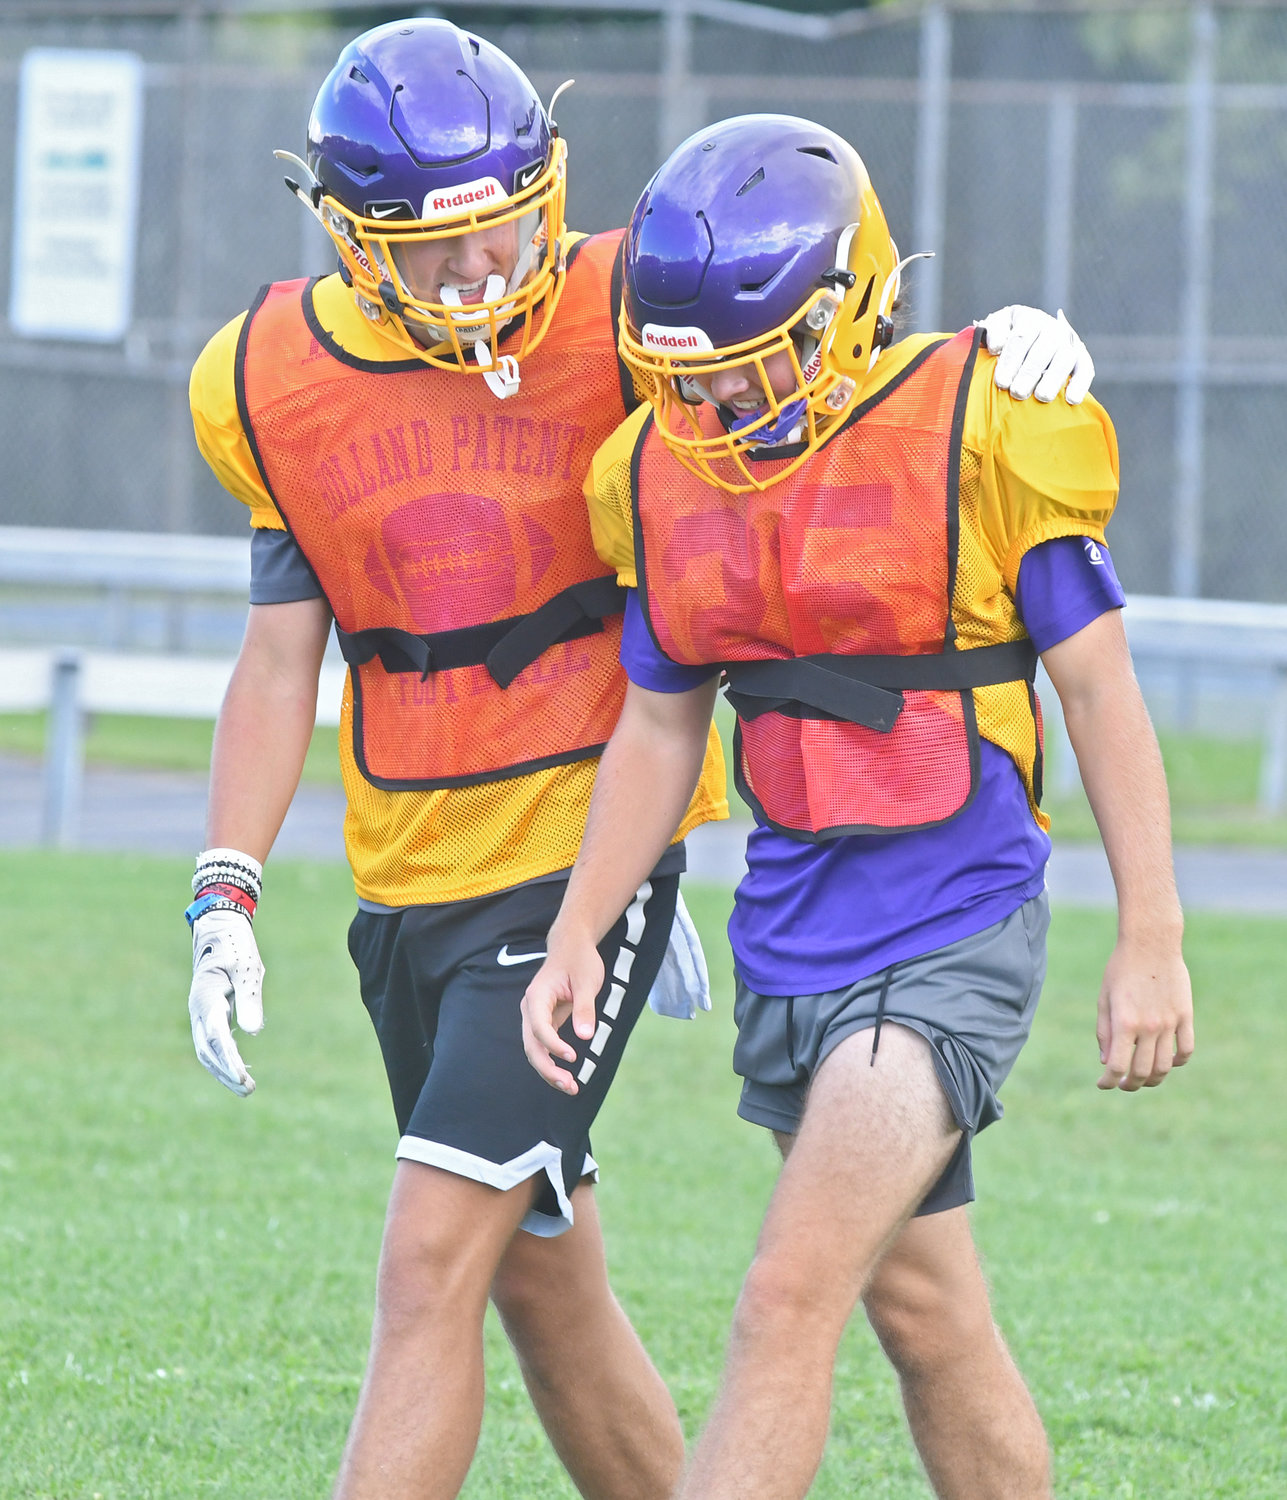 Holland Patent juniors Nick Acevedo, left, and Alex Hoole talk about coverage as they walk back to the huddle during defensive drills at the high school. Acevedo returns as a starting cornerback and Hoole is back at safety.